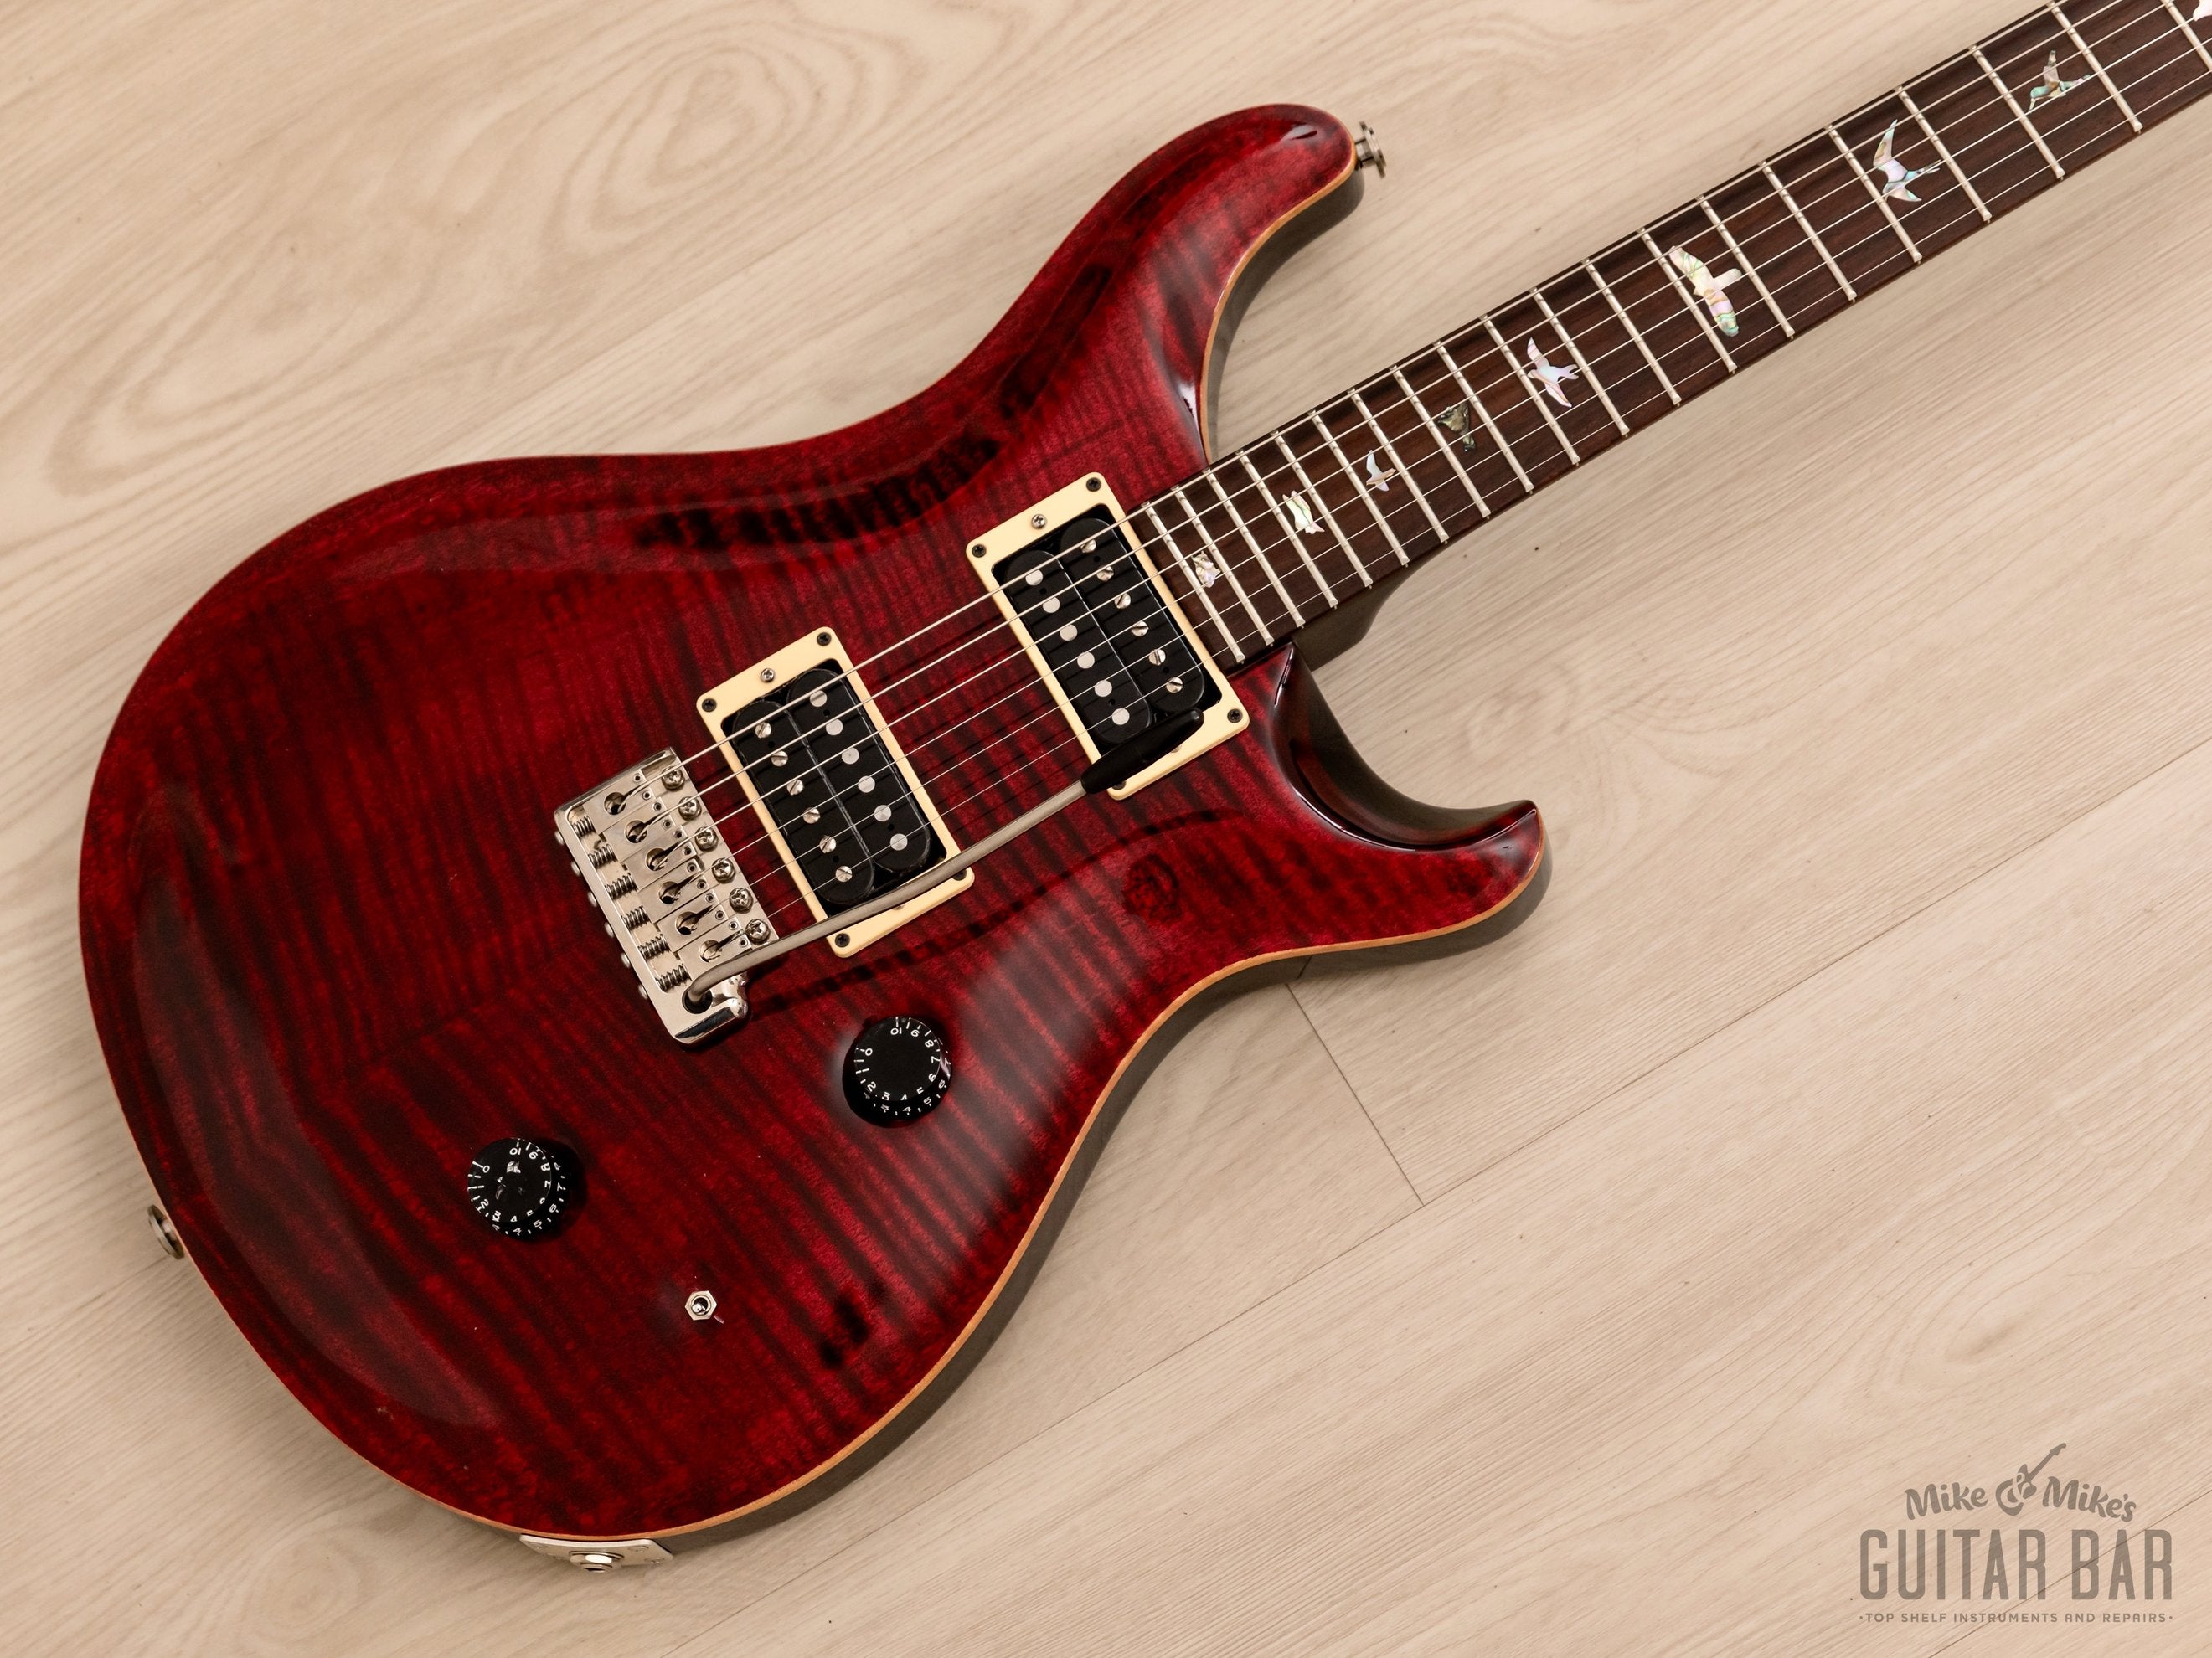 1987 Paul Reed Smith Custom 24 10 Top Black Cherry One-Owner, Collector-Grade w/ Case, Tags, Receipt